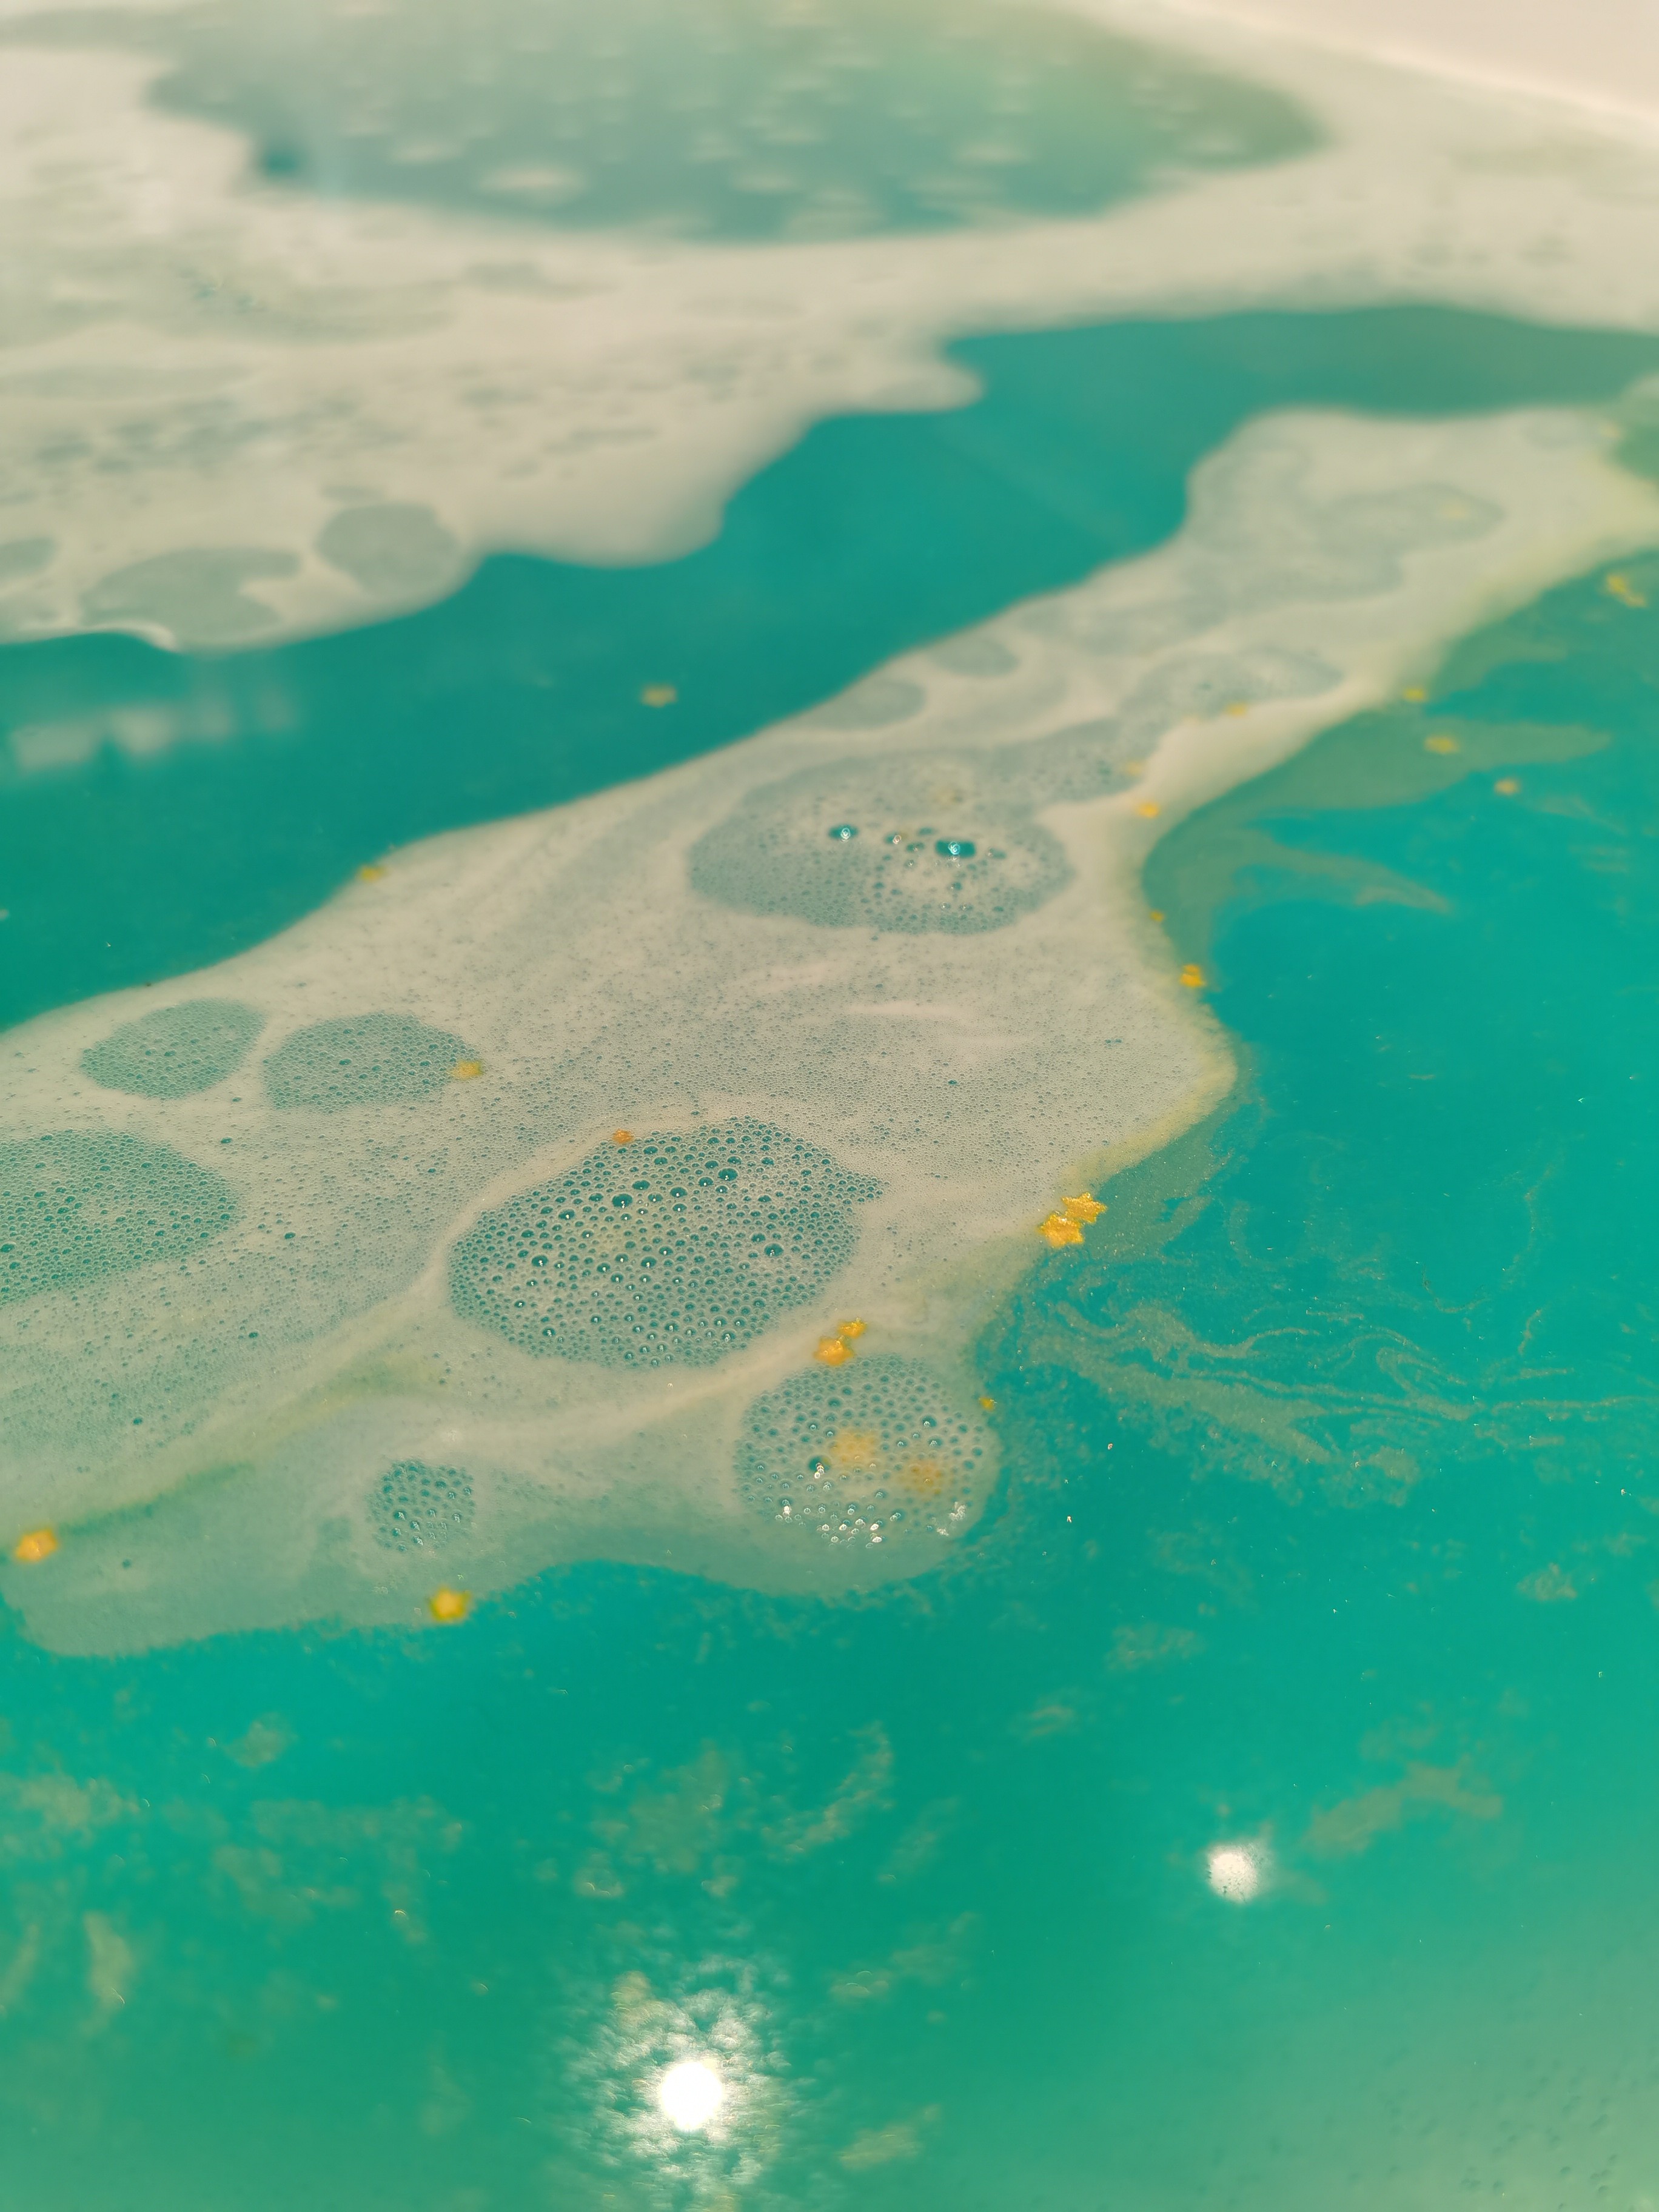 little golden stars in water from the Golden Wonder Bath Bomb by Lush